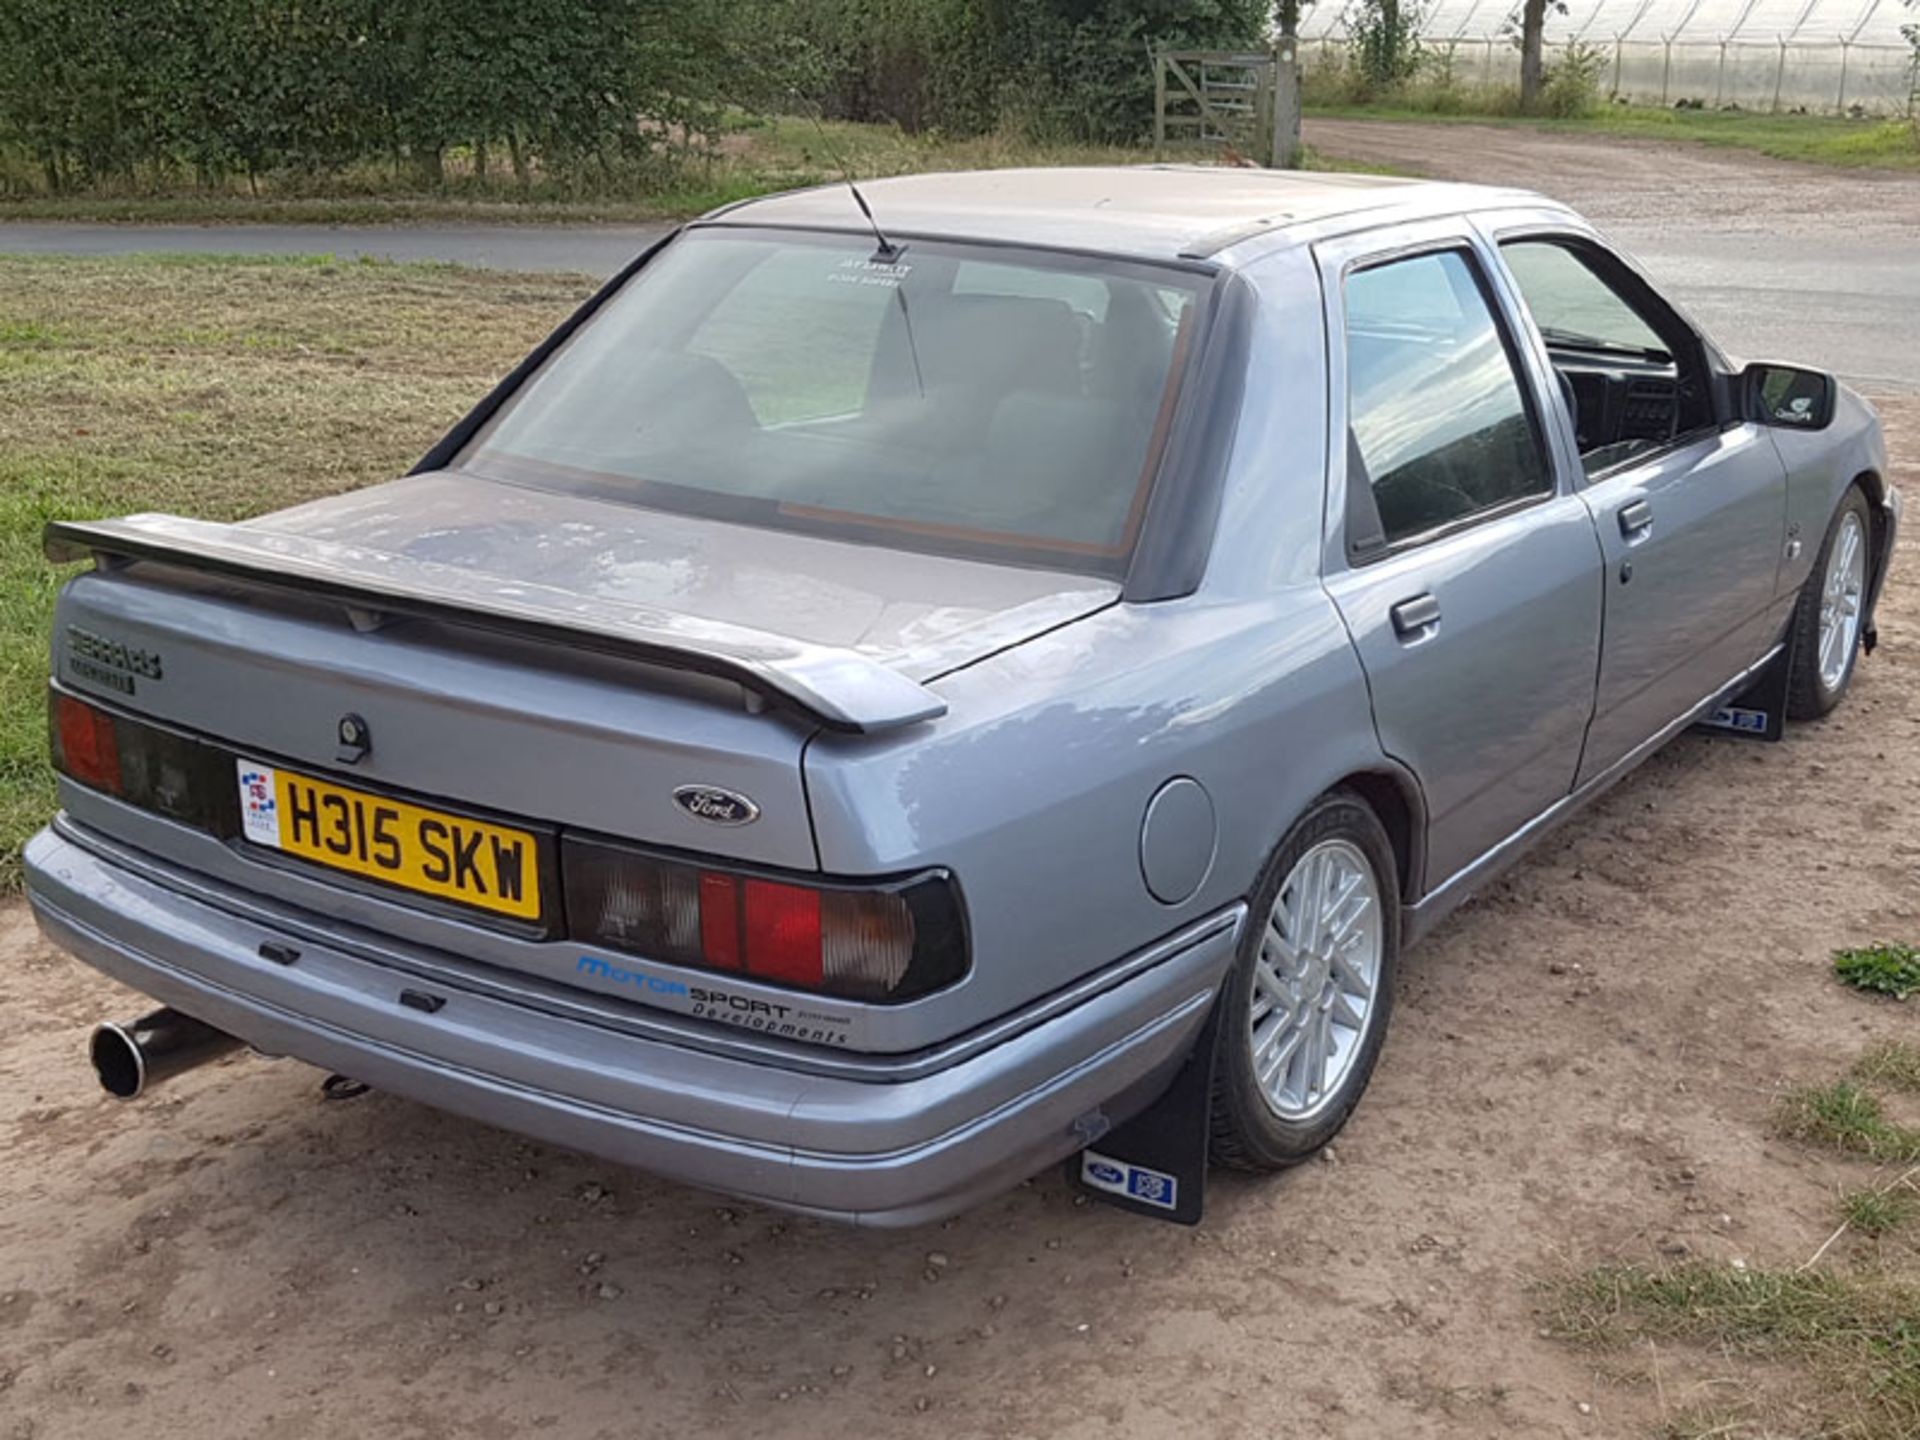 1991 Ford Sierra Sapphire RS Cosworth - Image 4 of 4